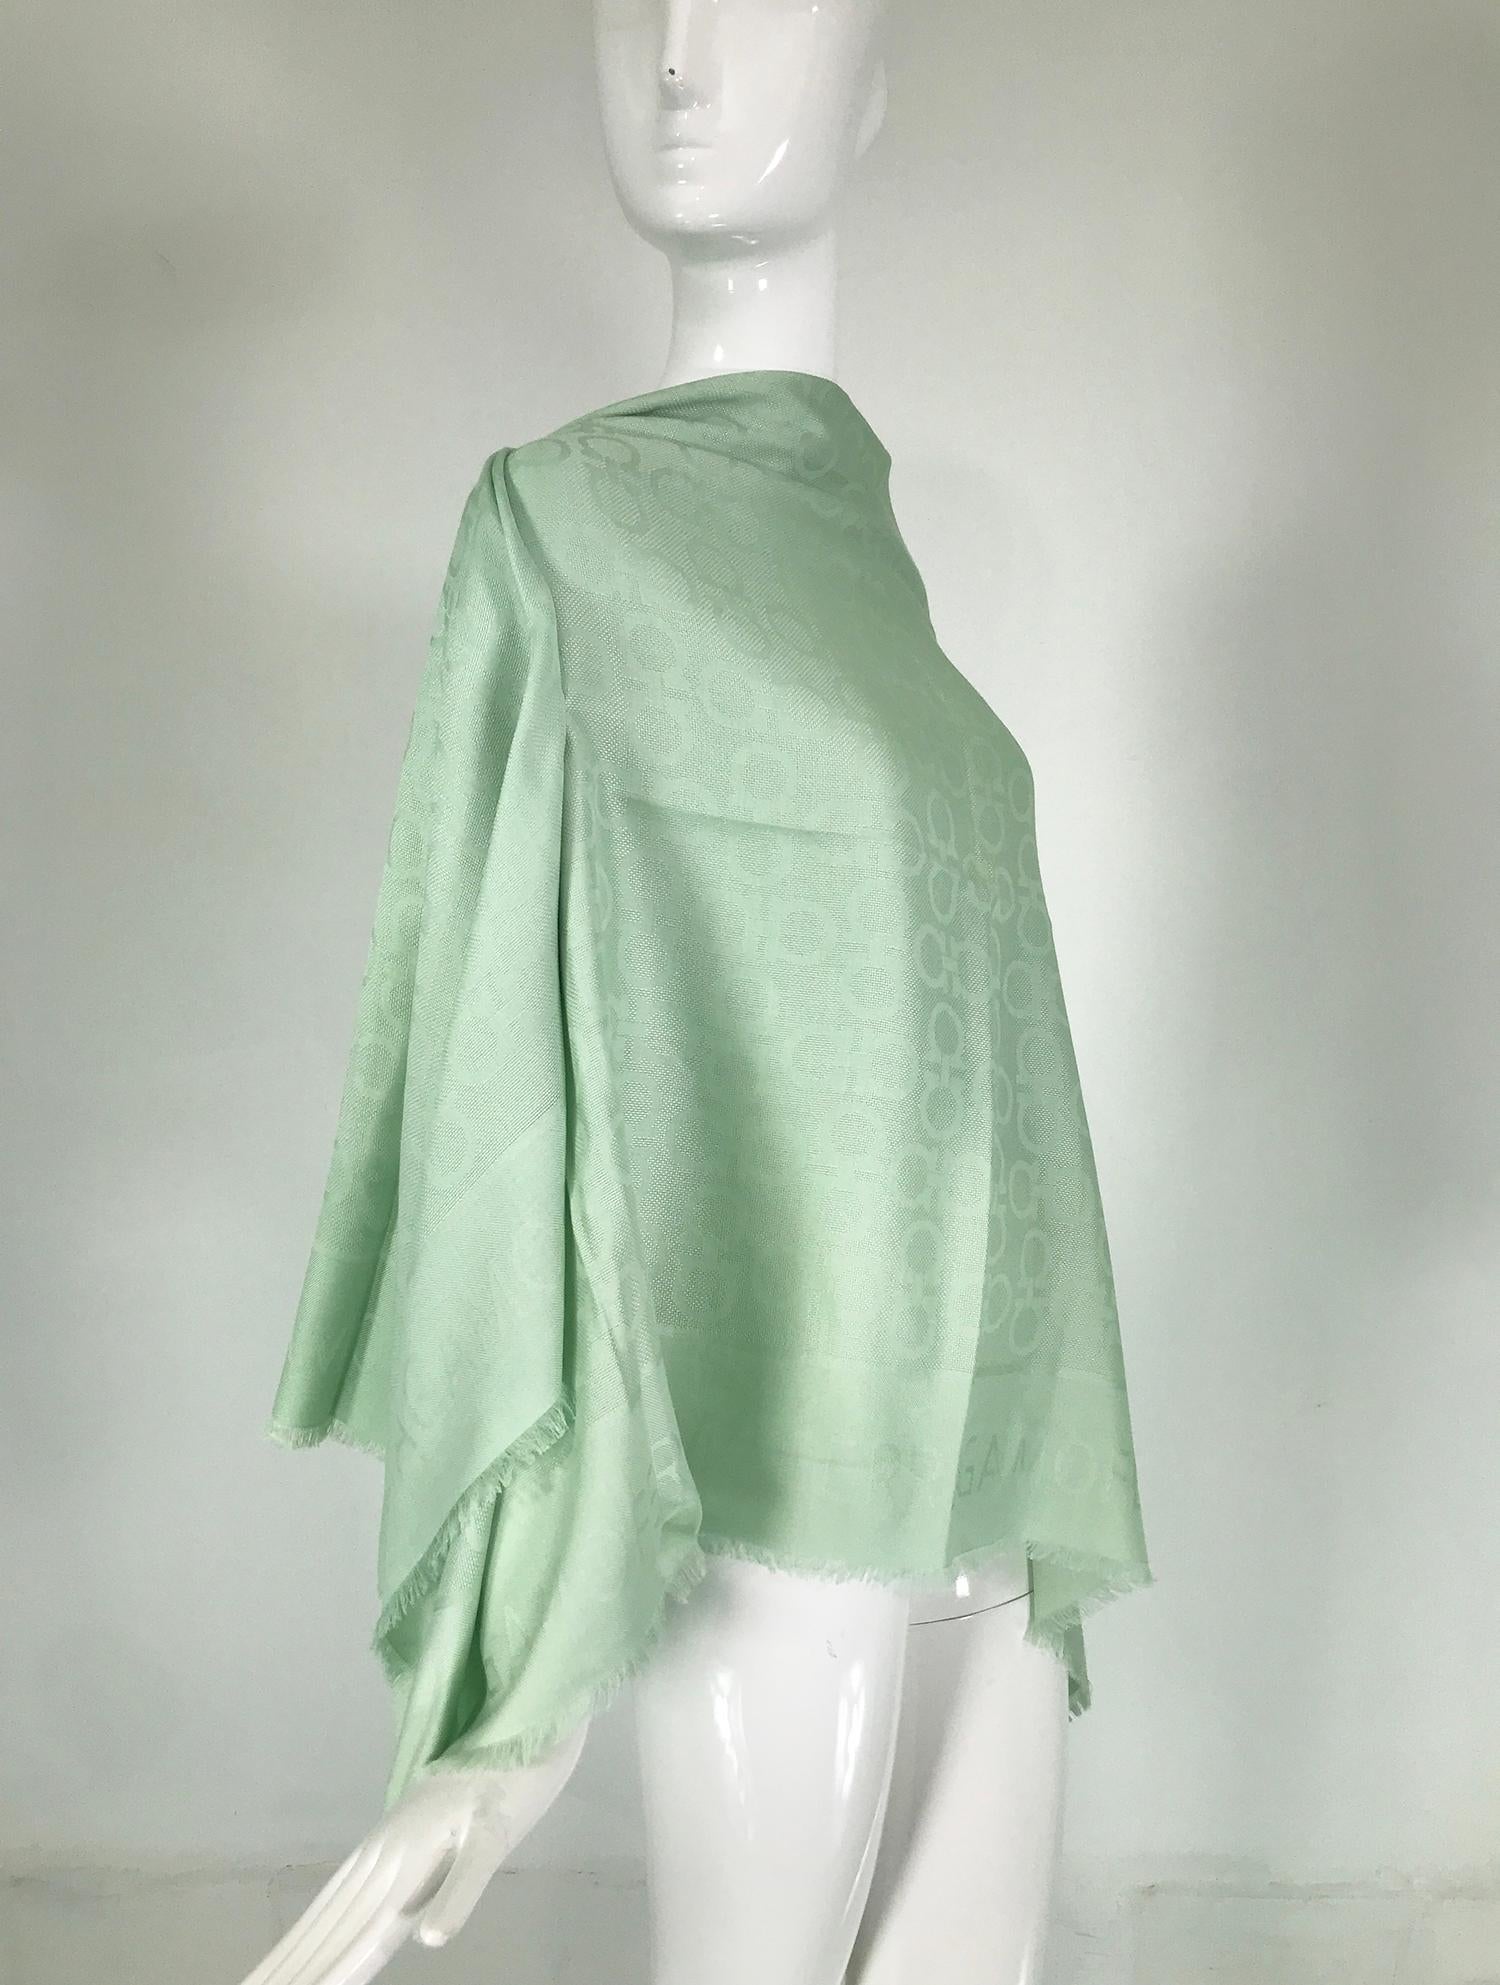 Salvatore Ferragamo Mint Green Silk & Wool Jacquard Shawl With Self Fringe In Good Condition For Sale In West Palm Beach, FL